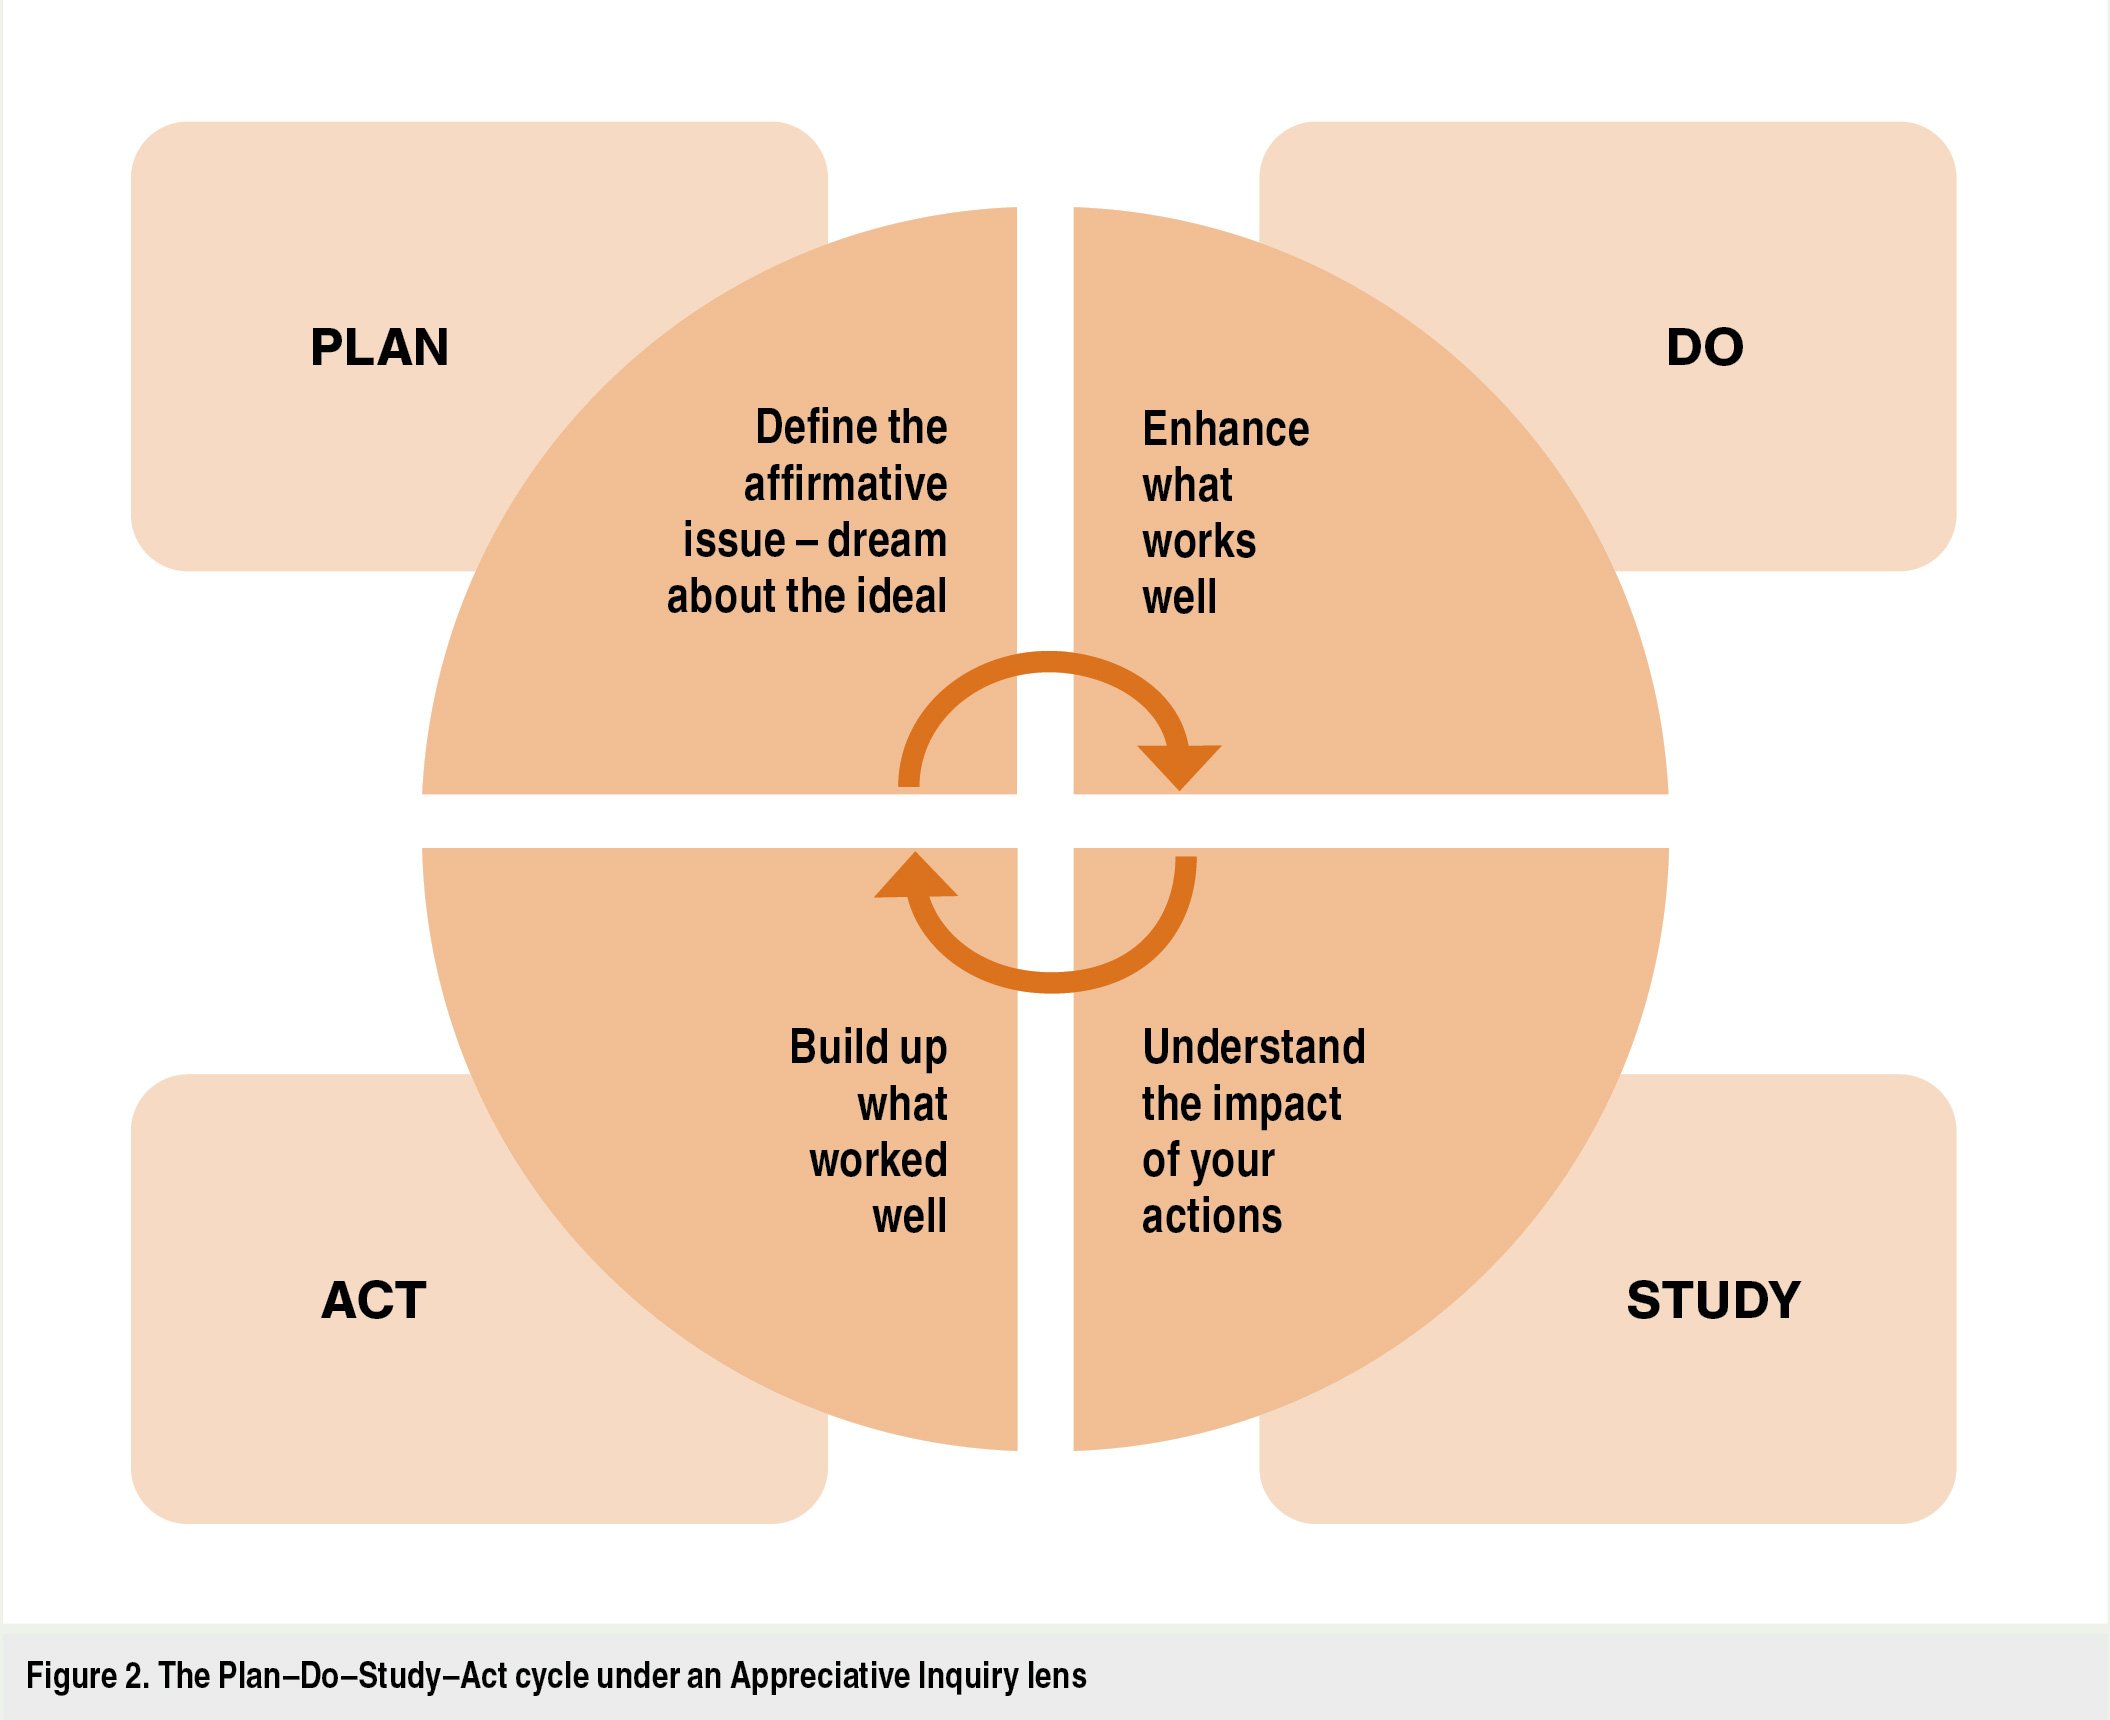 Figure 2. The Plan–Do–Study–Act cycle under an Appreciative Inquiry lens 